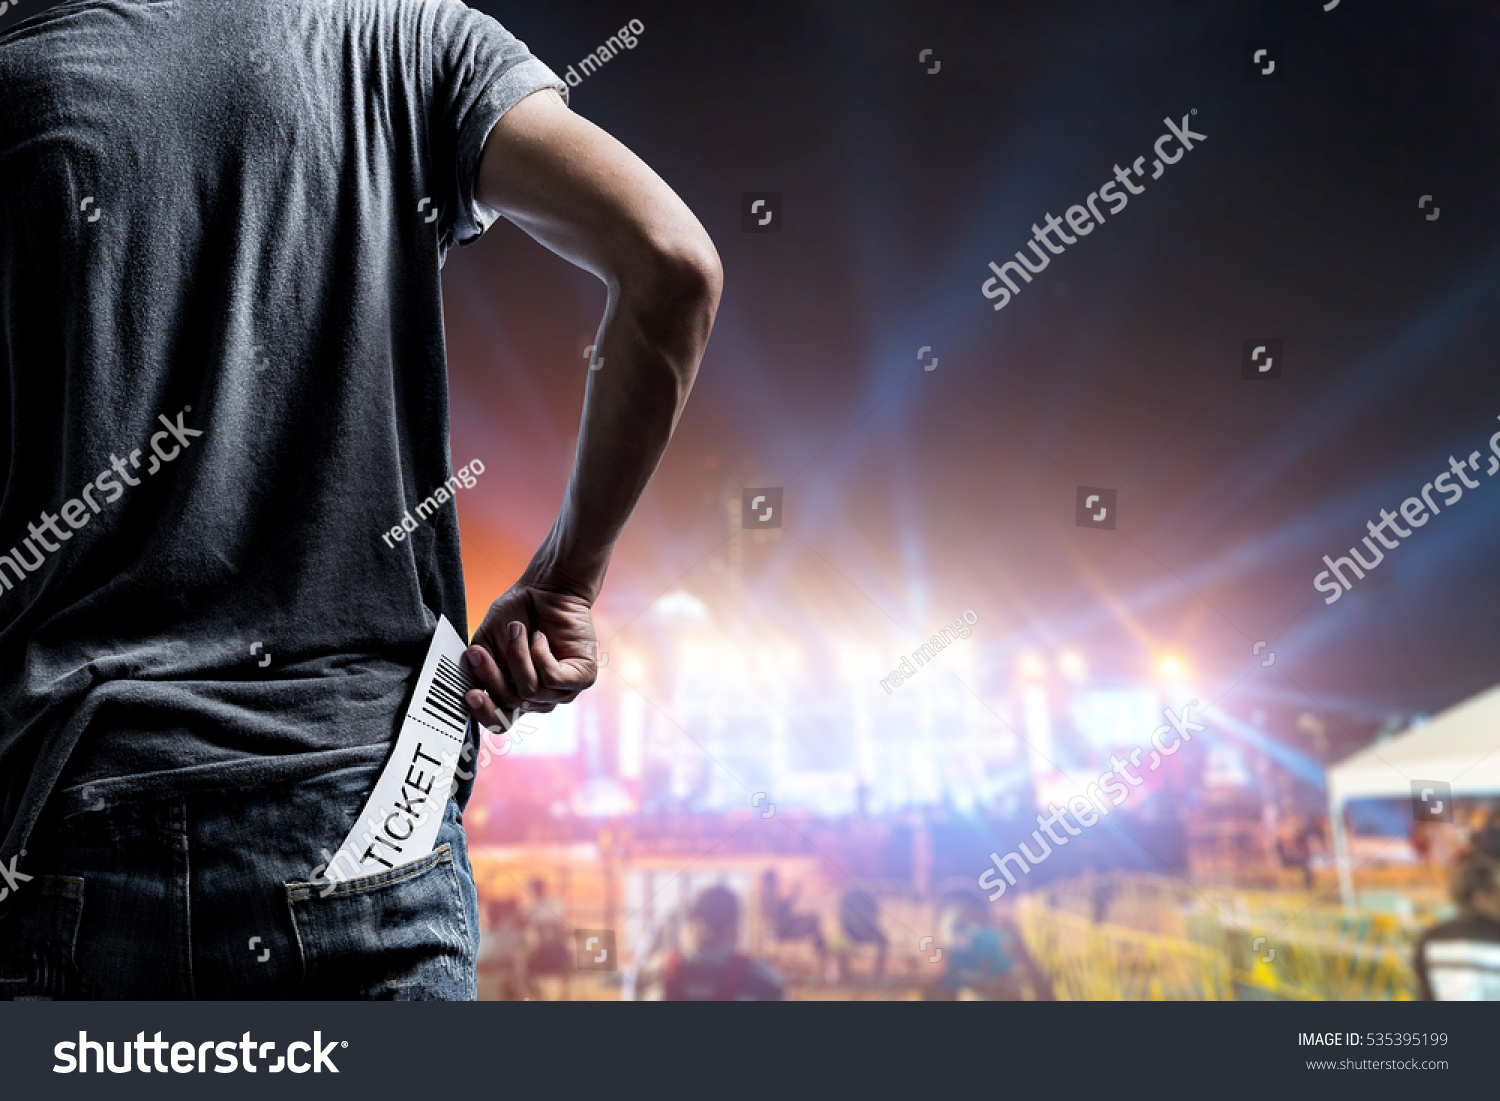 Customer presenting tickets or admission passes watch a rock music concert #535395199